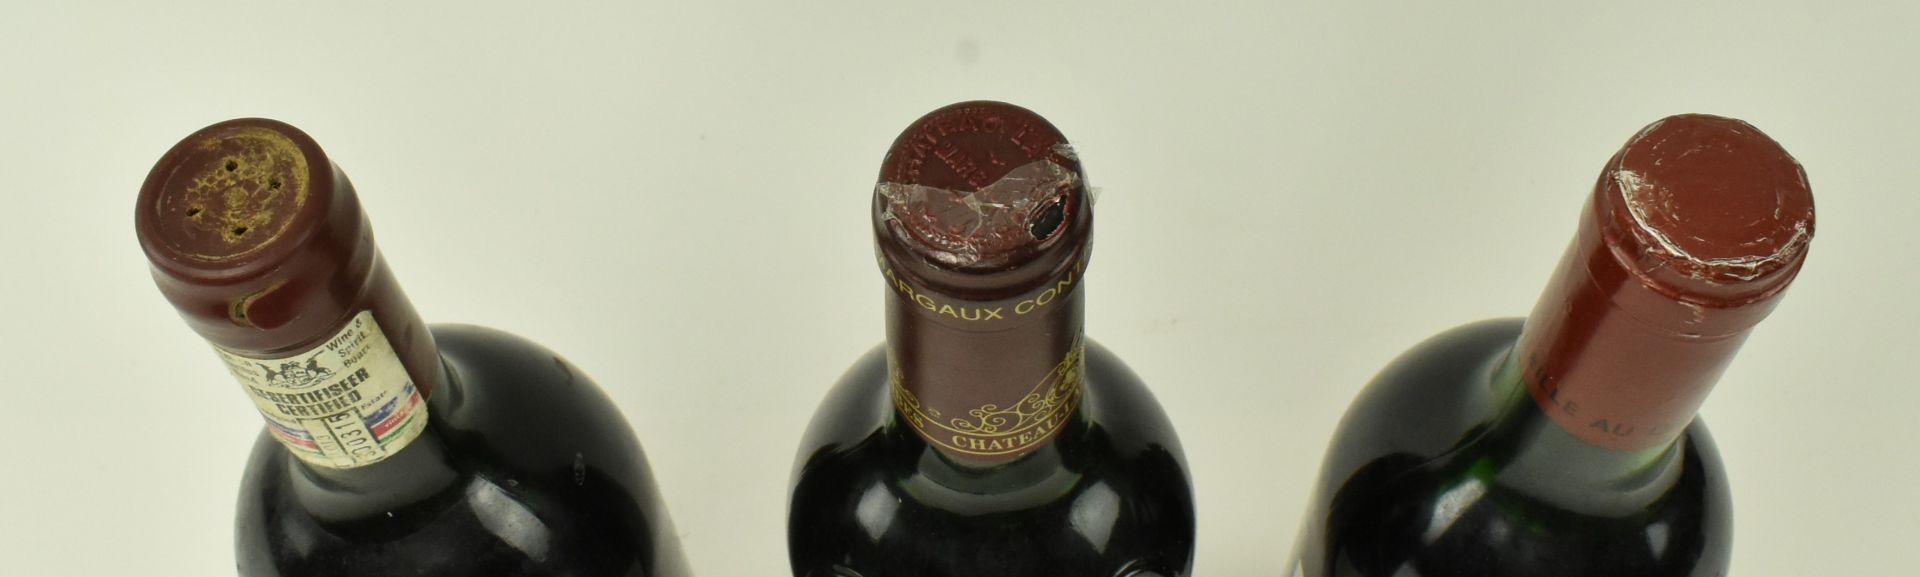 THREE VINTAGE FRENCH RED WINE BOTTLES - Image 2 of 9